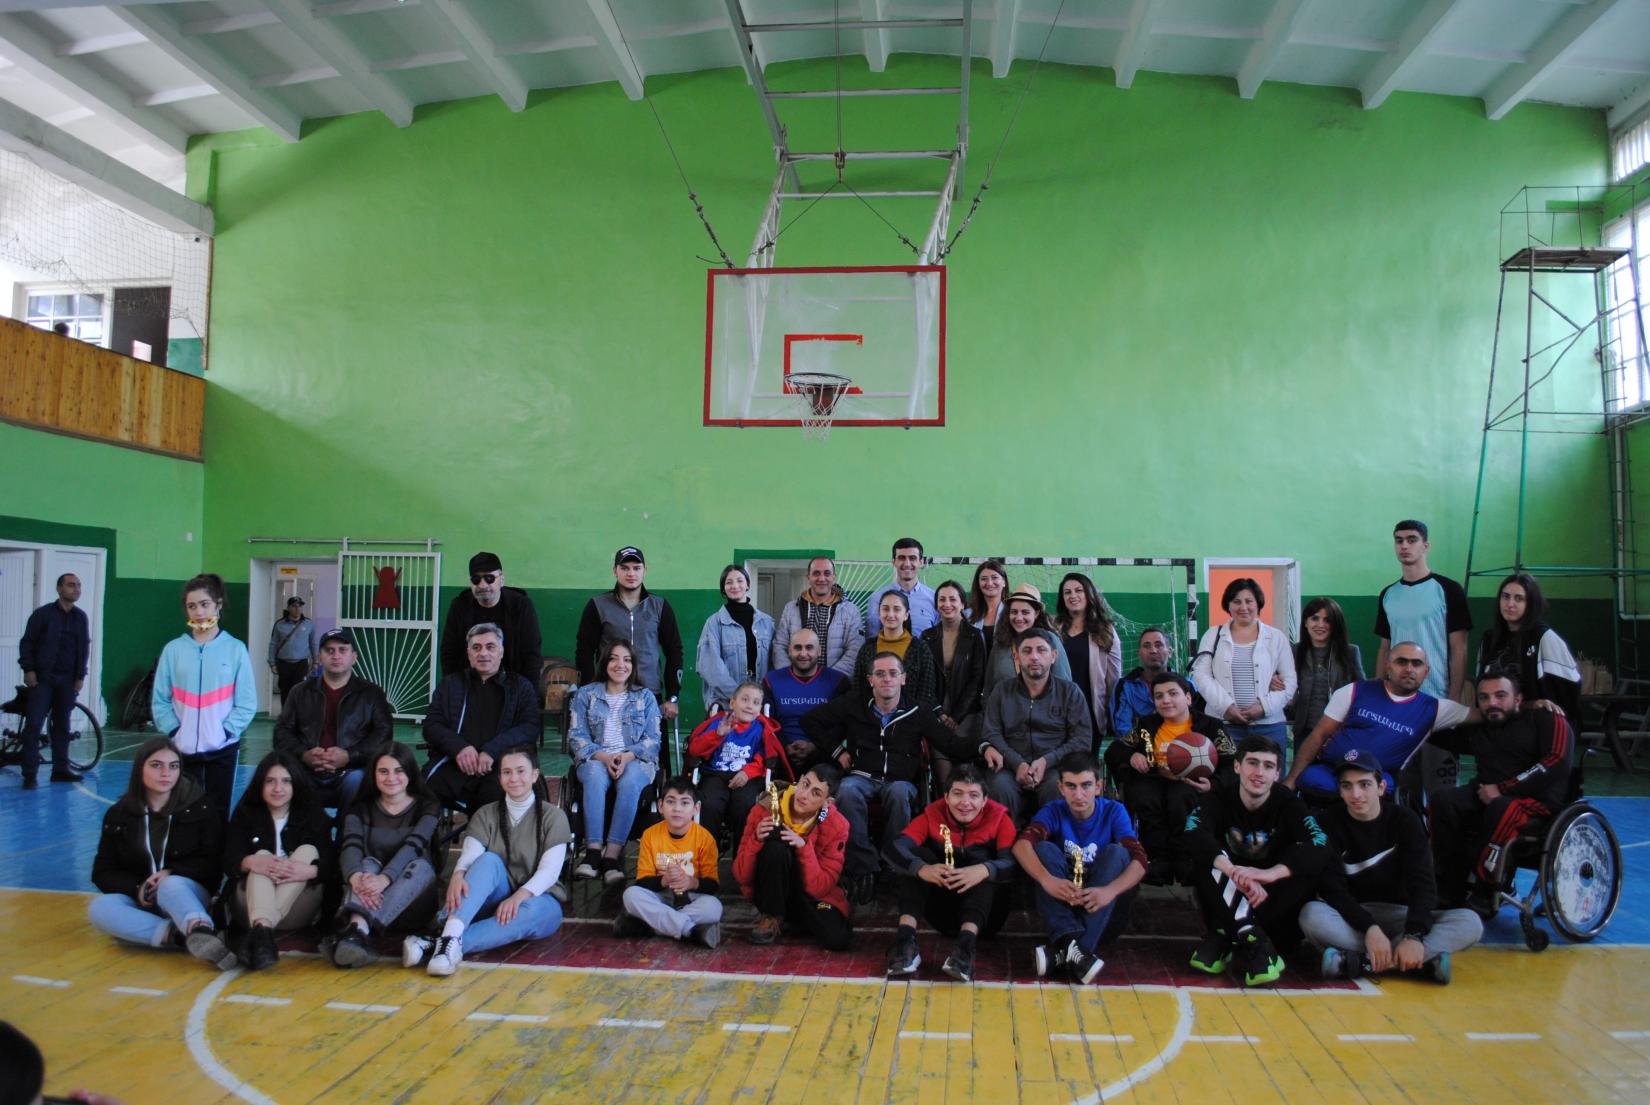 1.	Group photo of the participants of the launch event of the first wheelchair basketball team in Vanadzor, at the "Albert Azaryan Center" Sports School in Vanadzor.